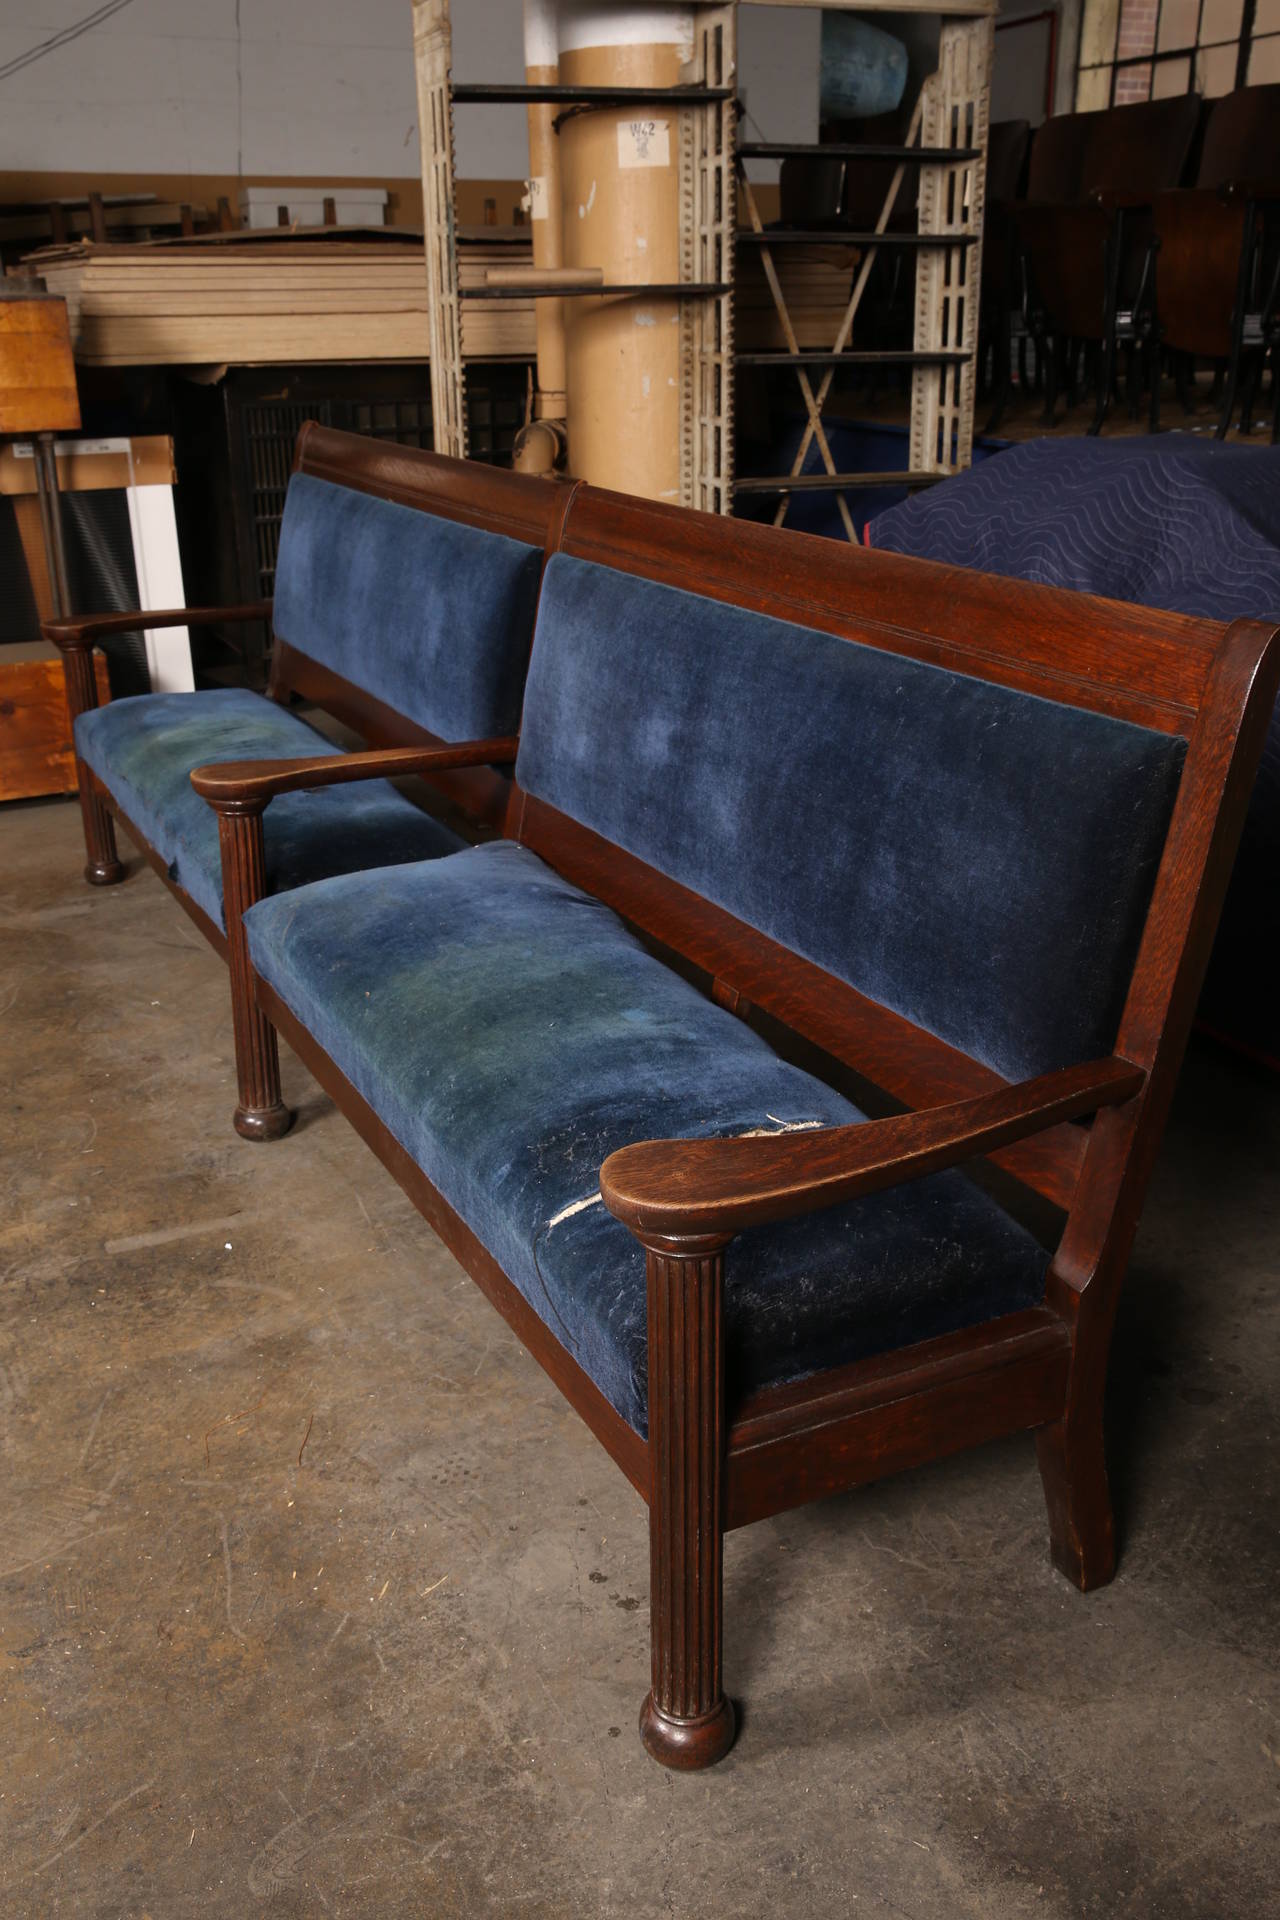 Vintage Masonic Temple Bench. This bench is sold as is with the finishing touches to be done by your local upholsterer. Seat height measures 16 1/2